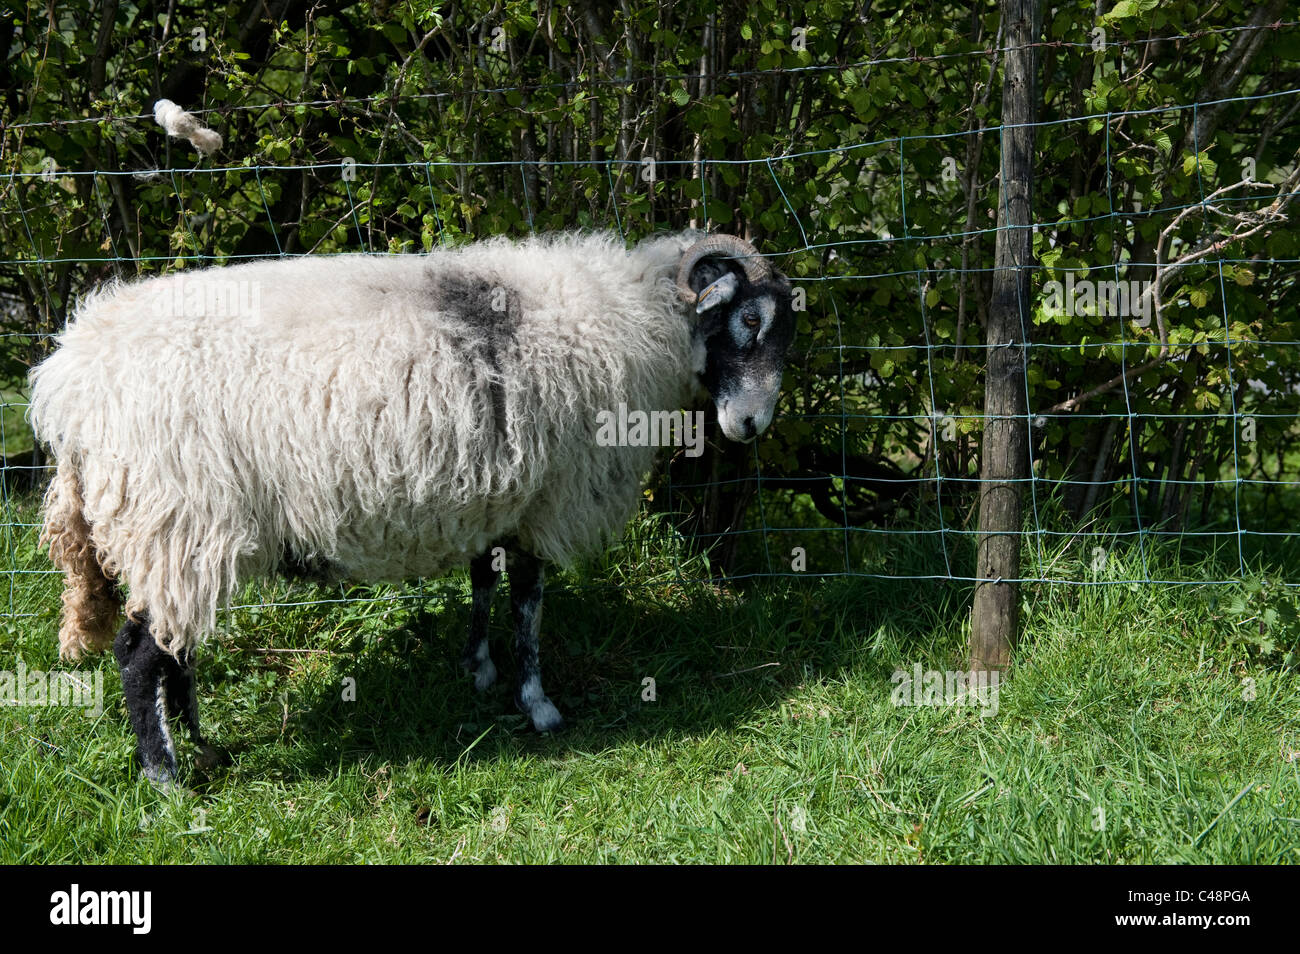 Horned sheep caught in wire netting fence. Stock Photo